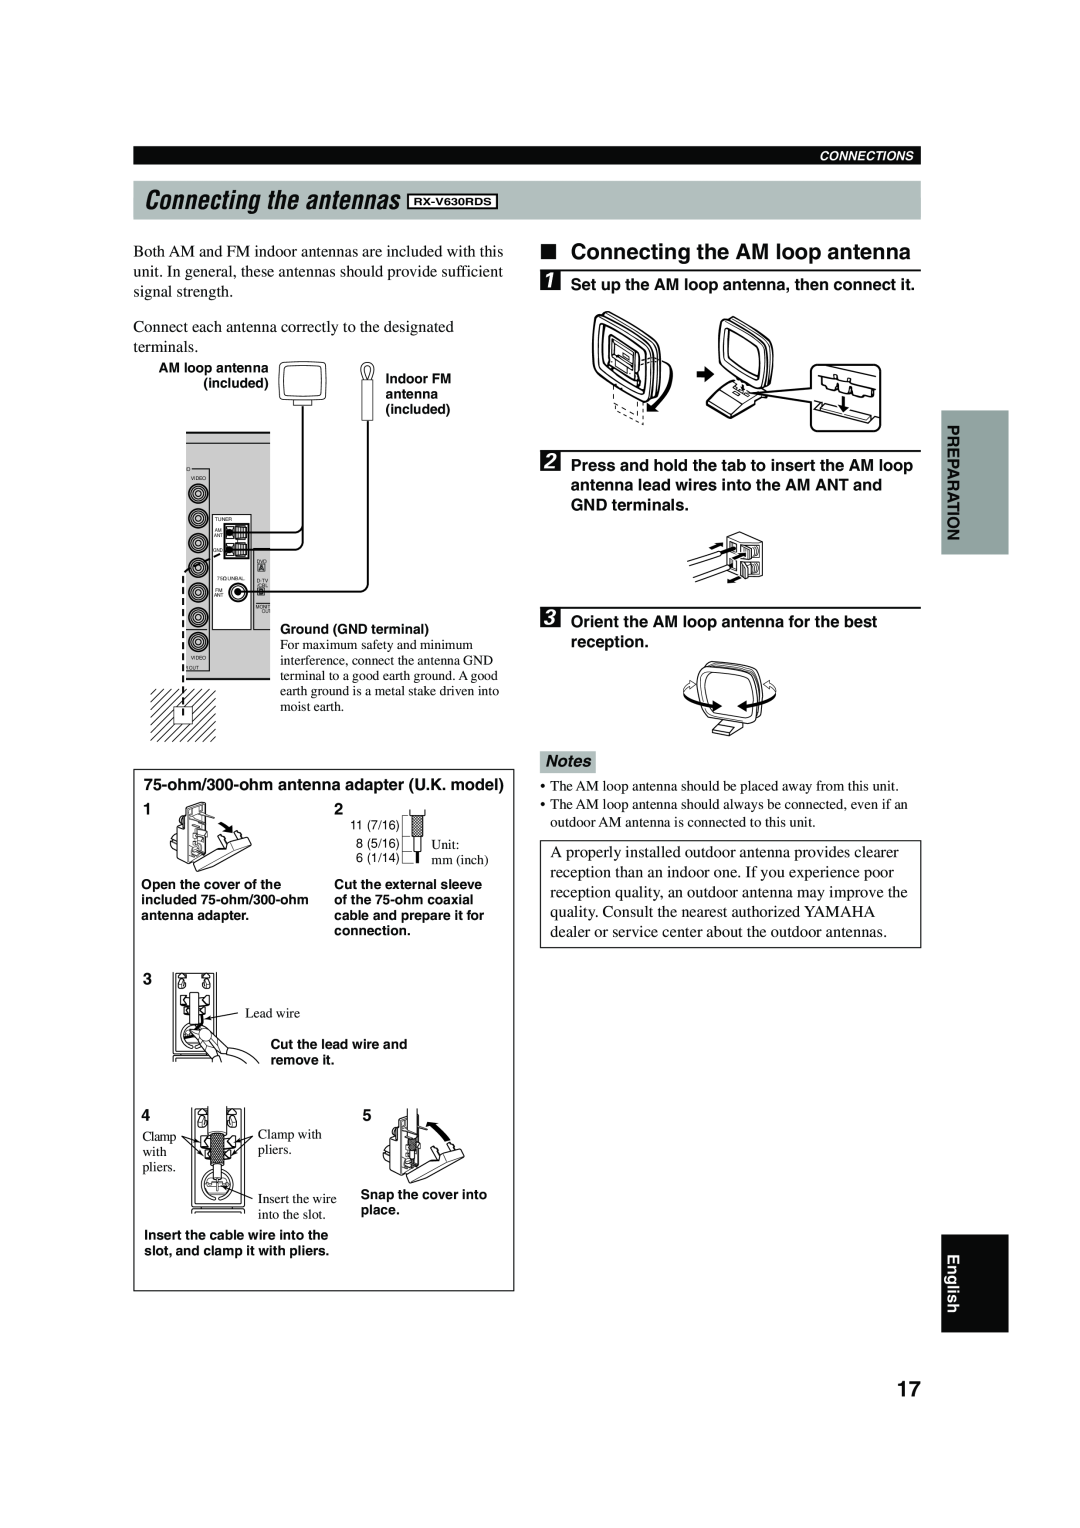 Yamaha owner manual Connecting the antennas RX-V630RDS, Connecting the AM loop antenna, English 